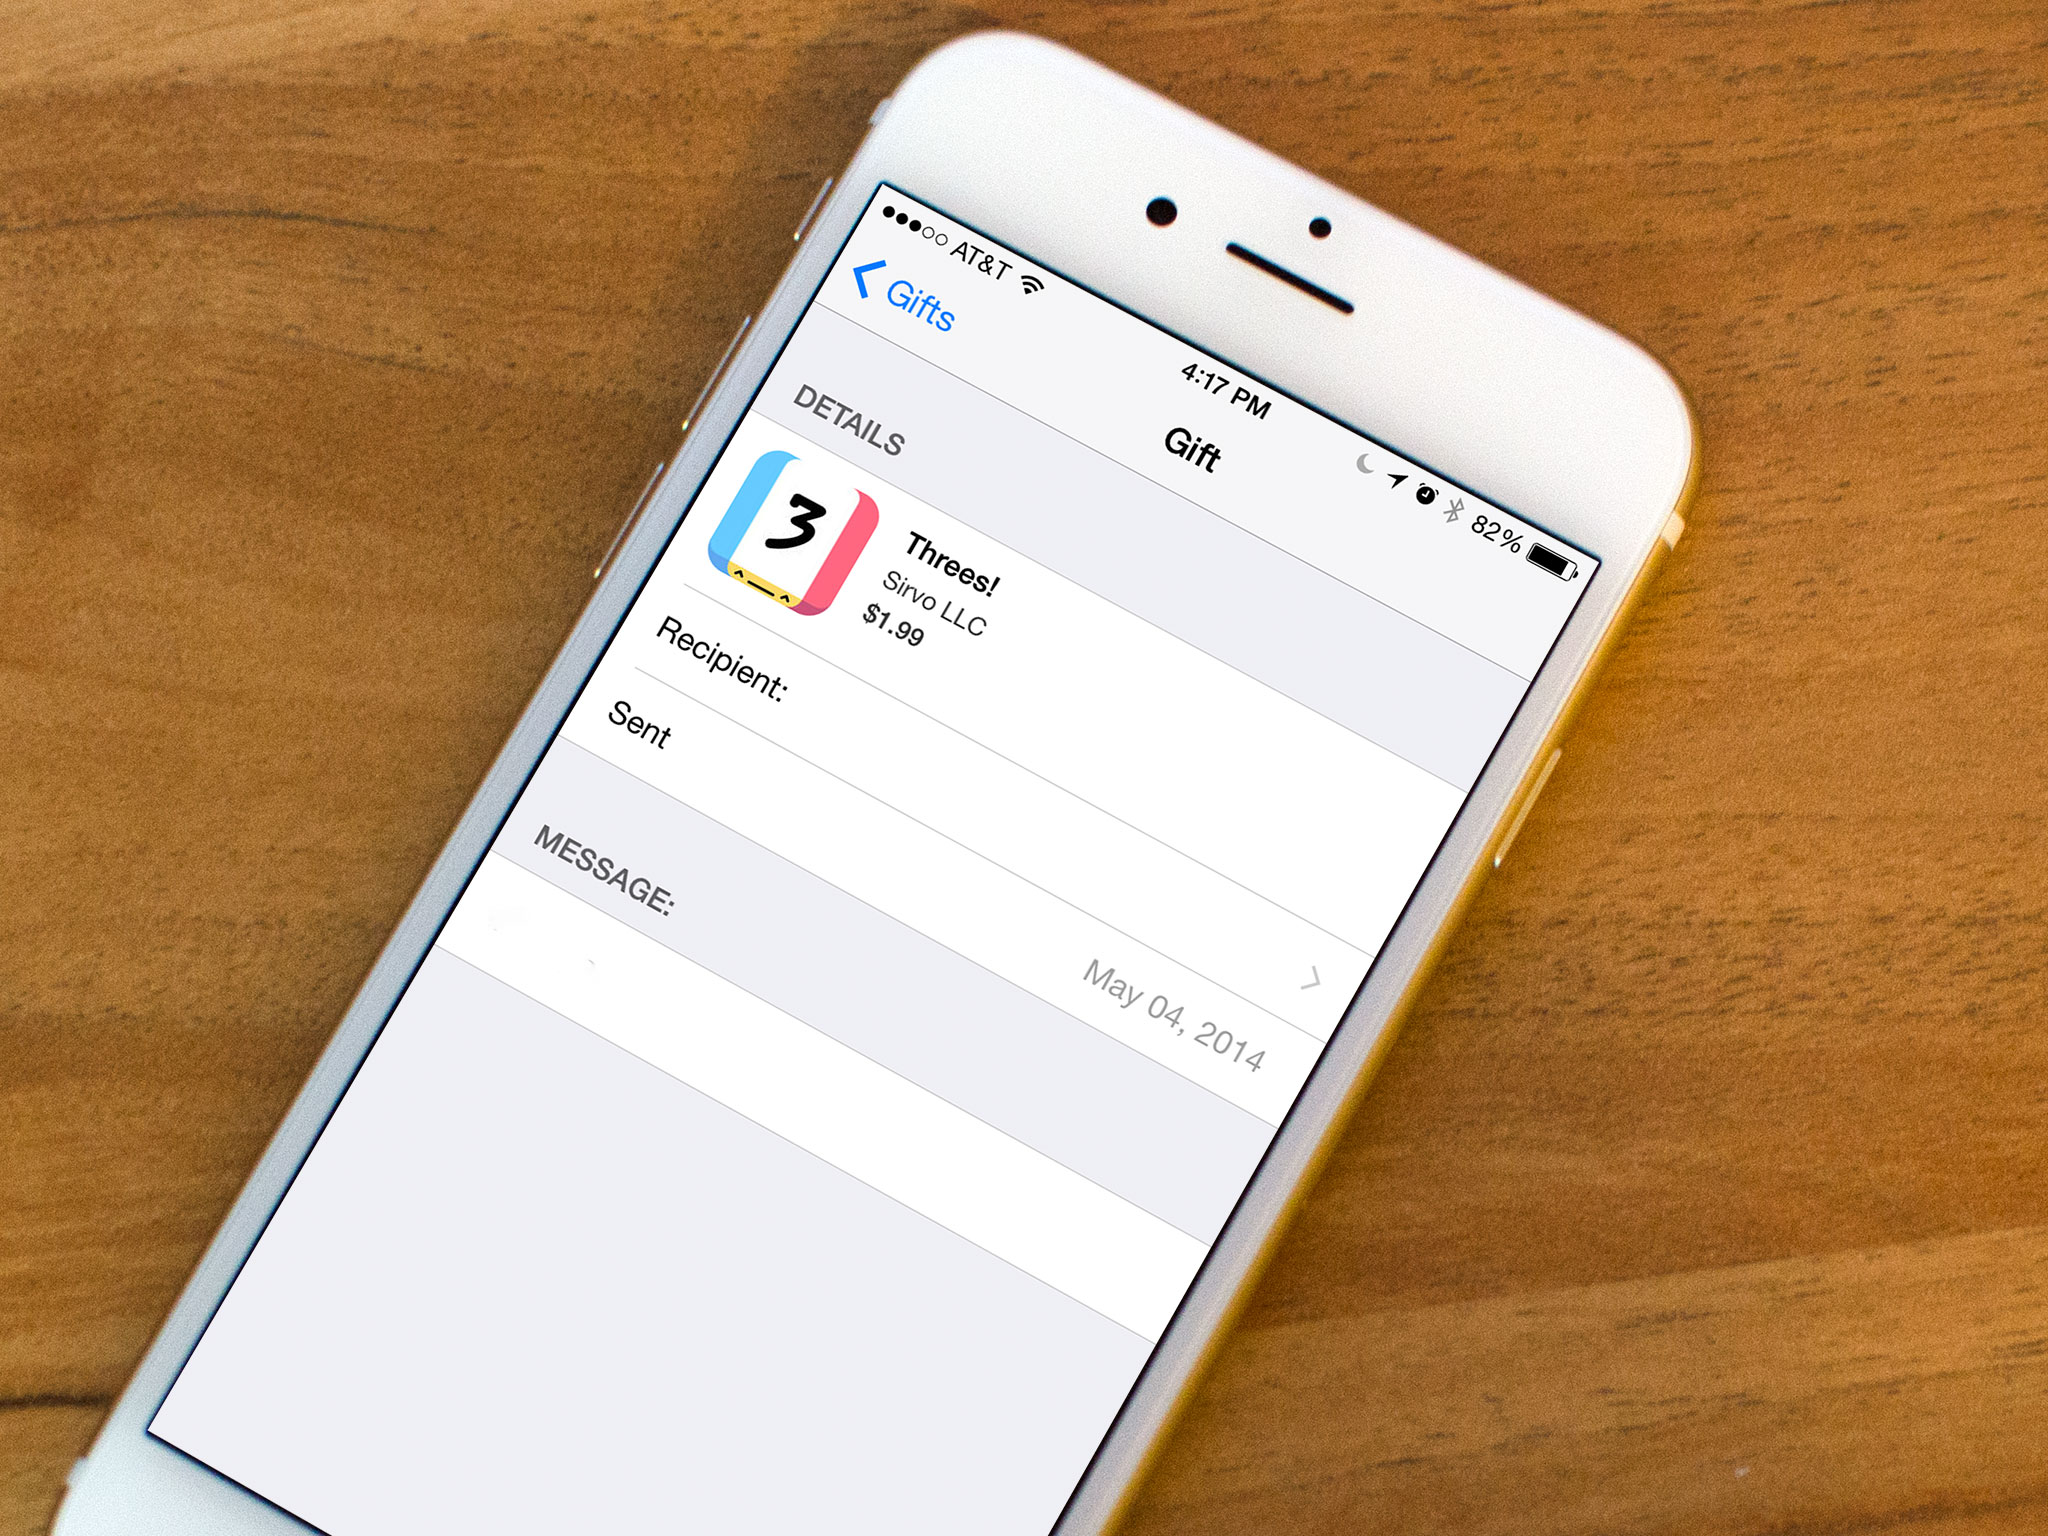 How to review iTunes, iBooks, or App Store gifts on iPhone or iPad